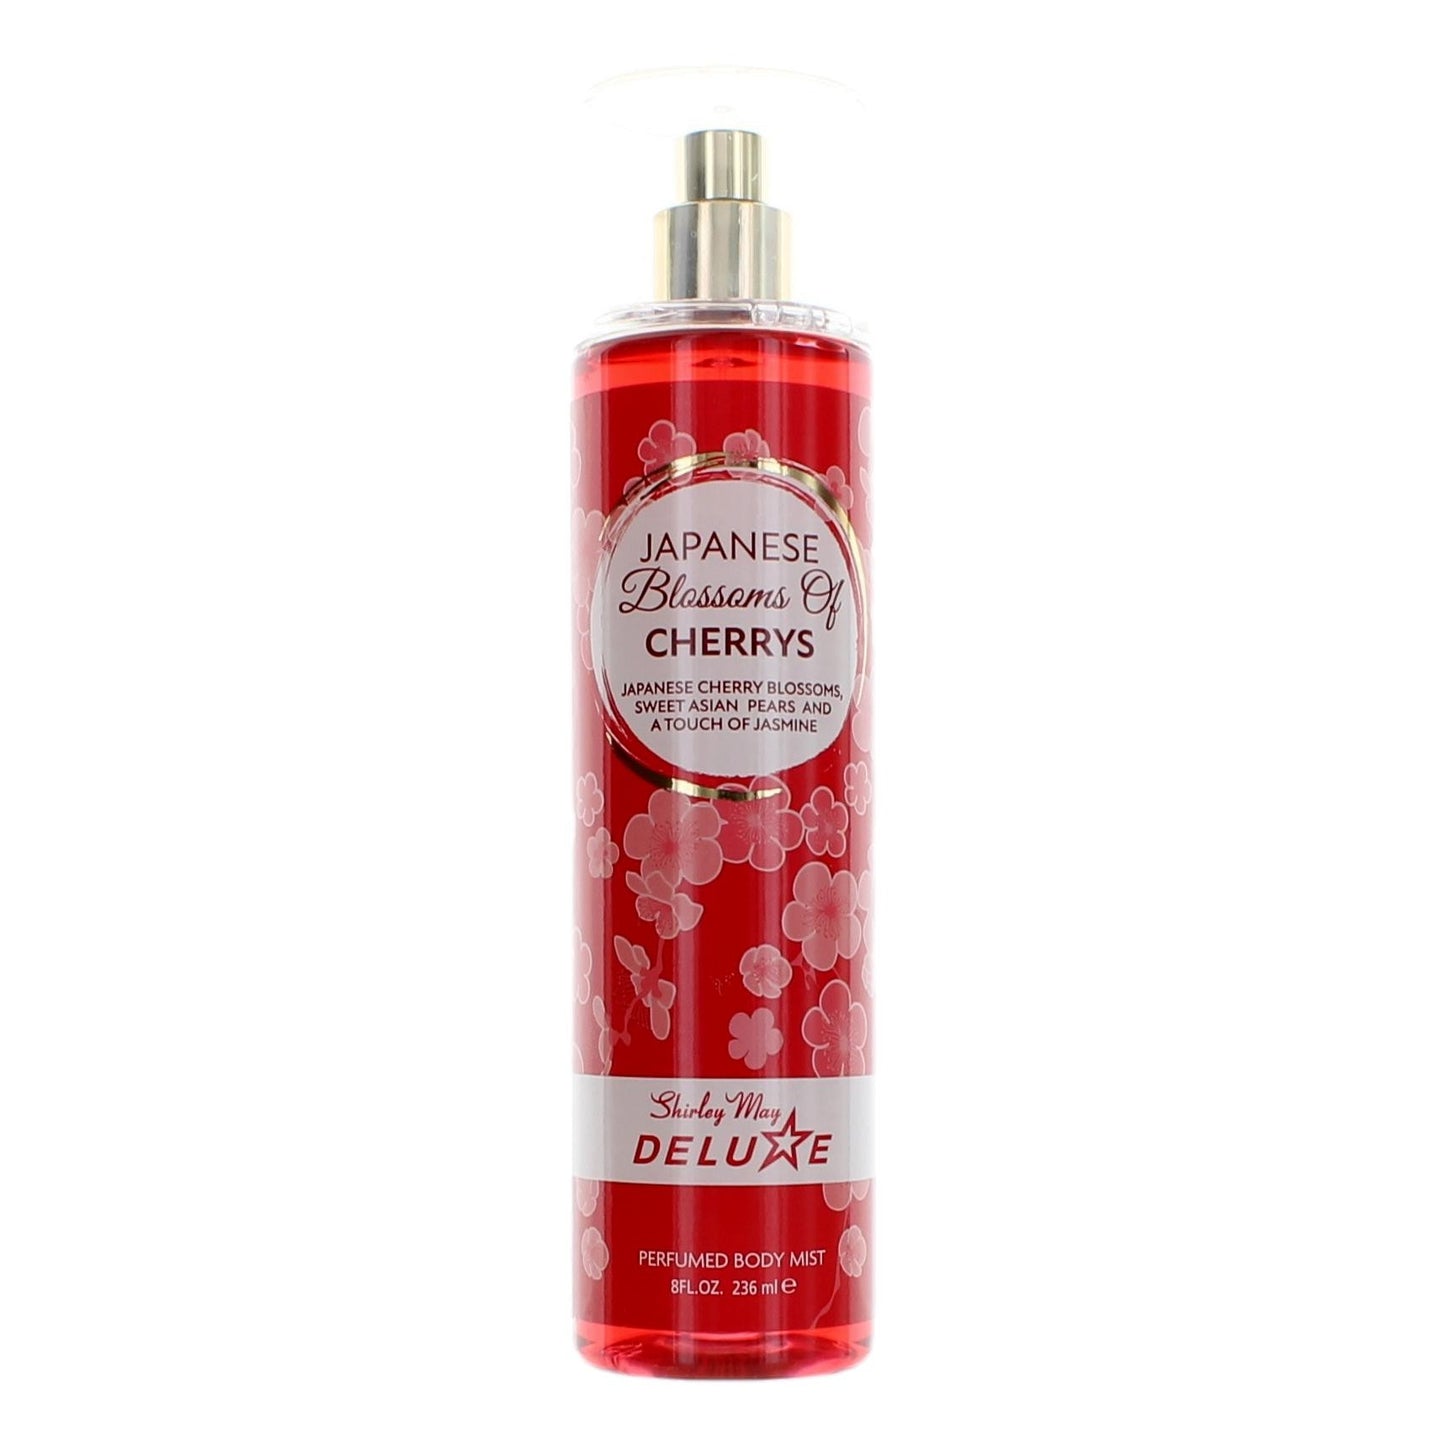 Bottle of Japanese Blossom Of Cherrys by Shirley May Deluxe, 8 oz Perfumed Body Mist for Women